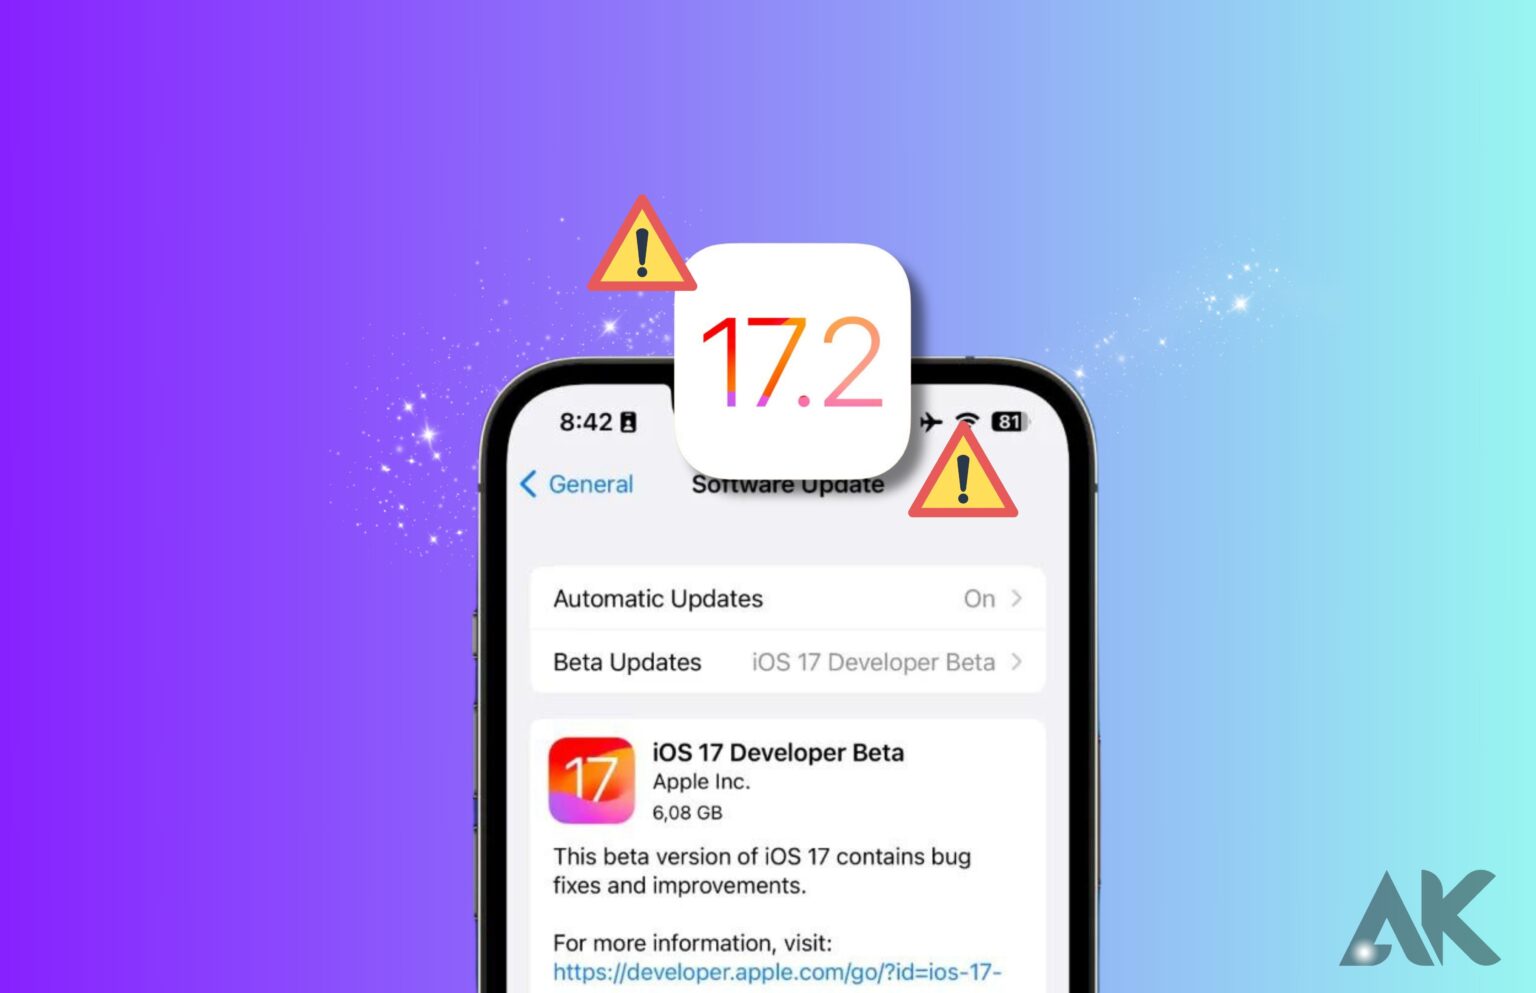 iOS 17.2 beta bugs: the most common issues and how to report them